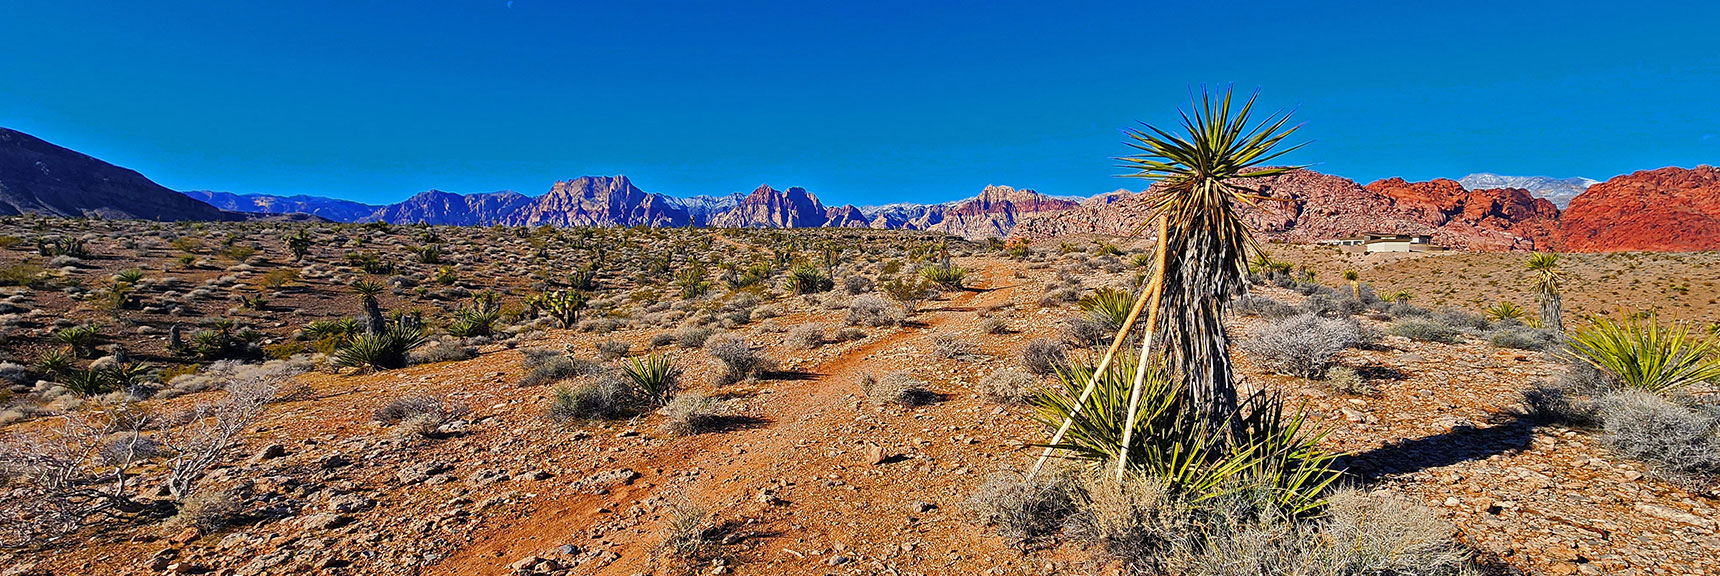 Freeway Trail Toward Red Rock Canyon. Trekking Poles Are Valuable Gear. | Calico Basin Daily Workout Trails | Calico Basin, Nevada